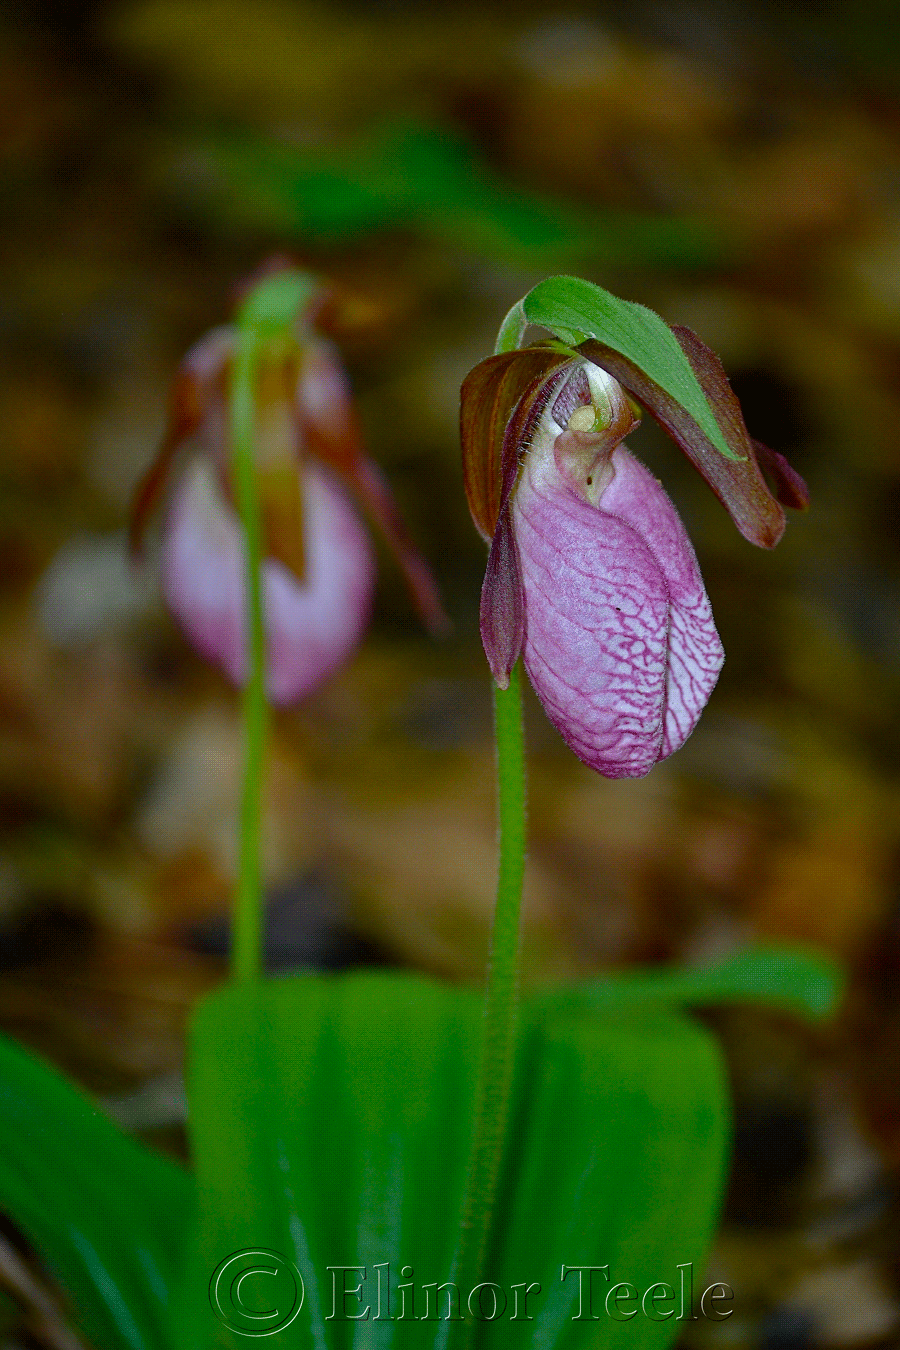 Lady's Slipper Orchid, Ravenswood, Gloucester MA